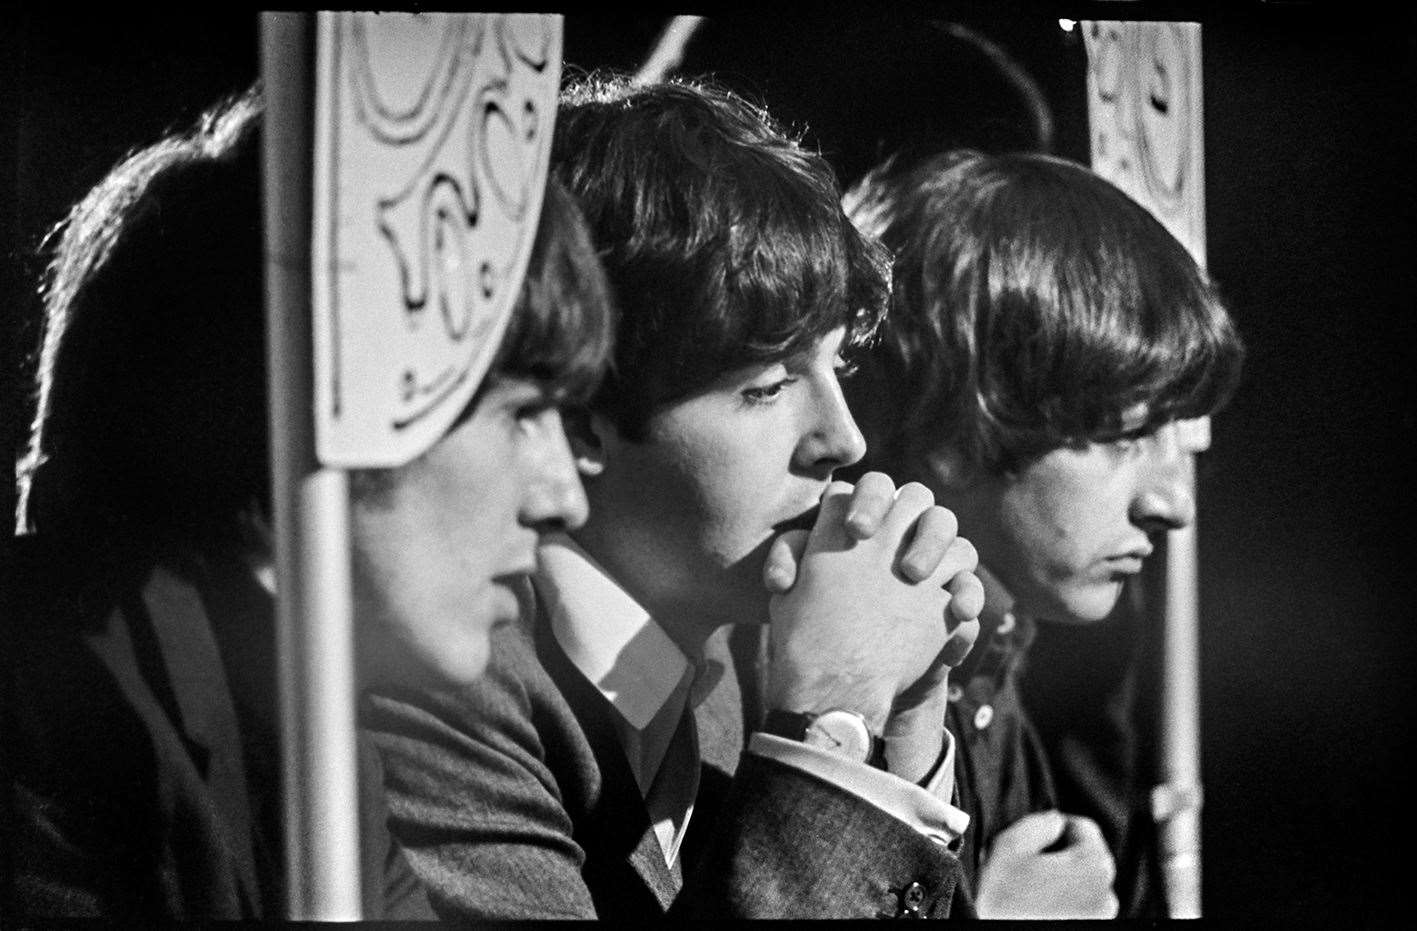 An image of The Beatles on show believed to be taken while the band watched a performance by Cilla Black.